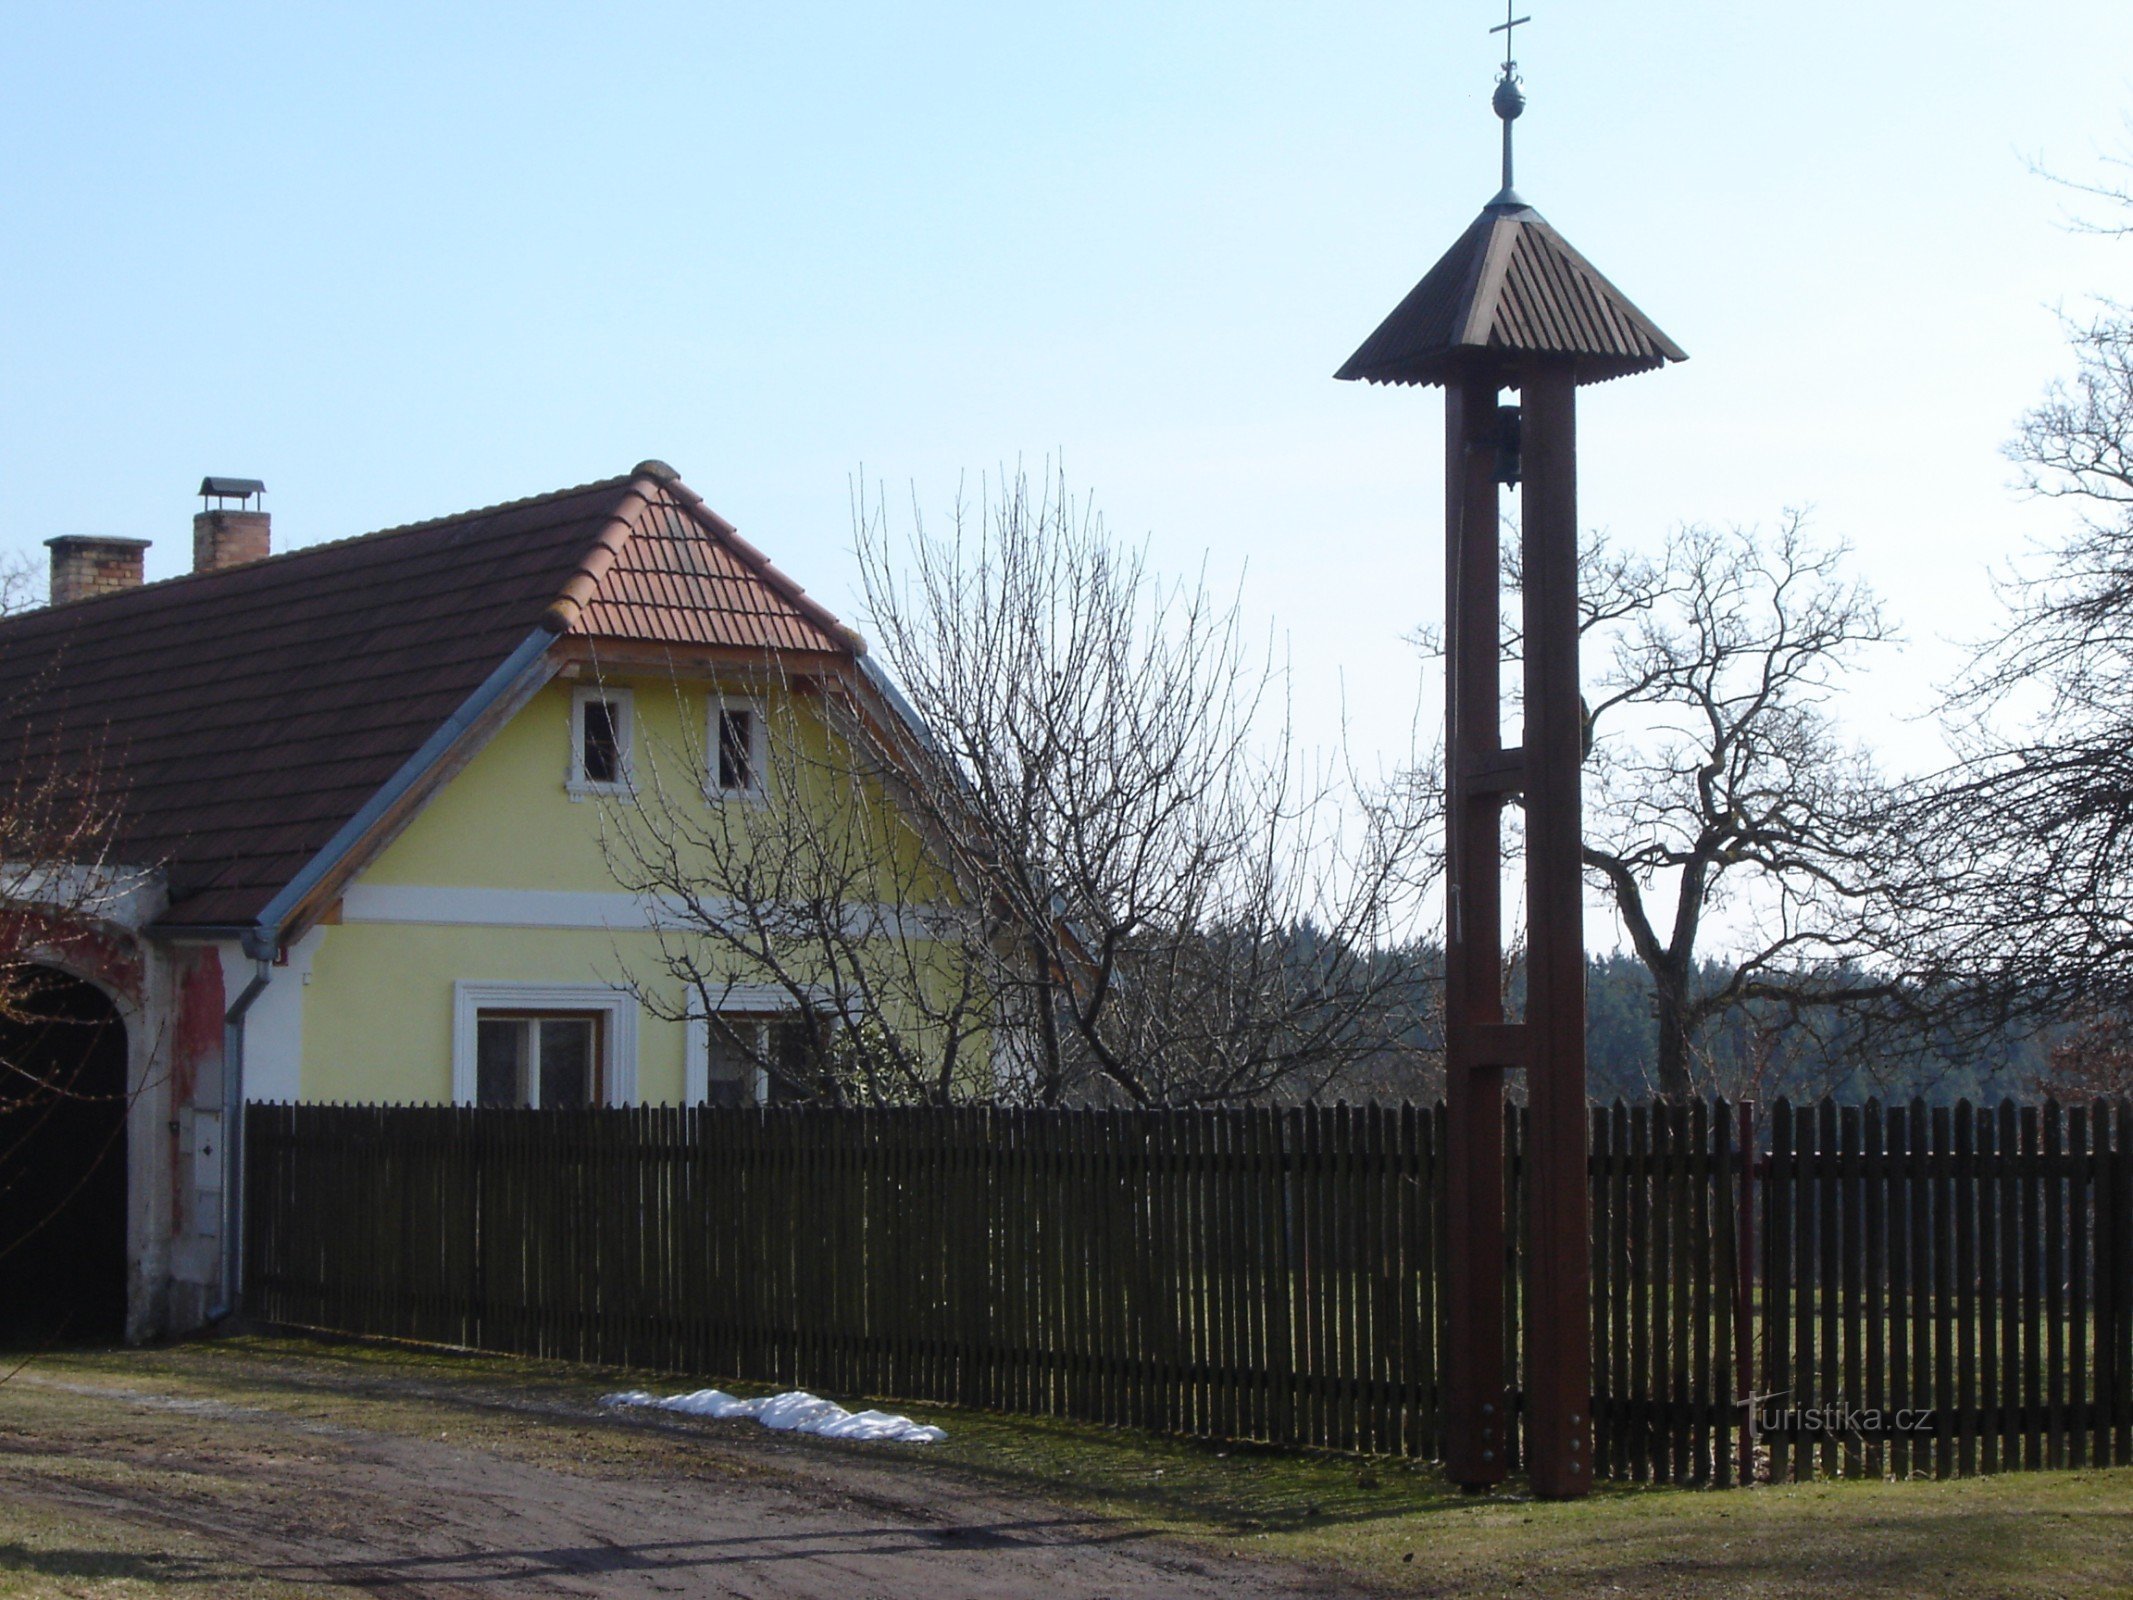 Větrov settlement with bell tower